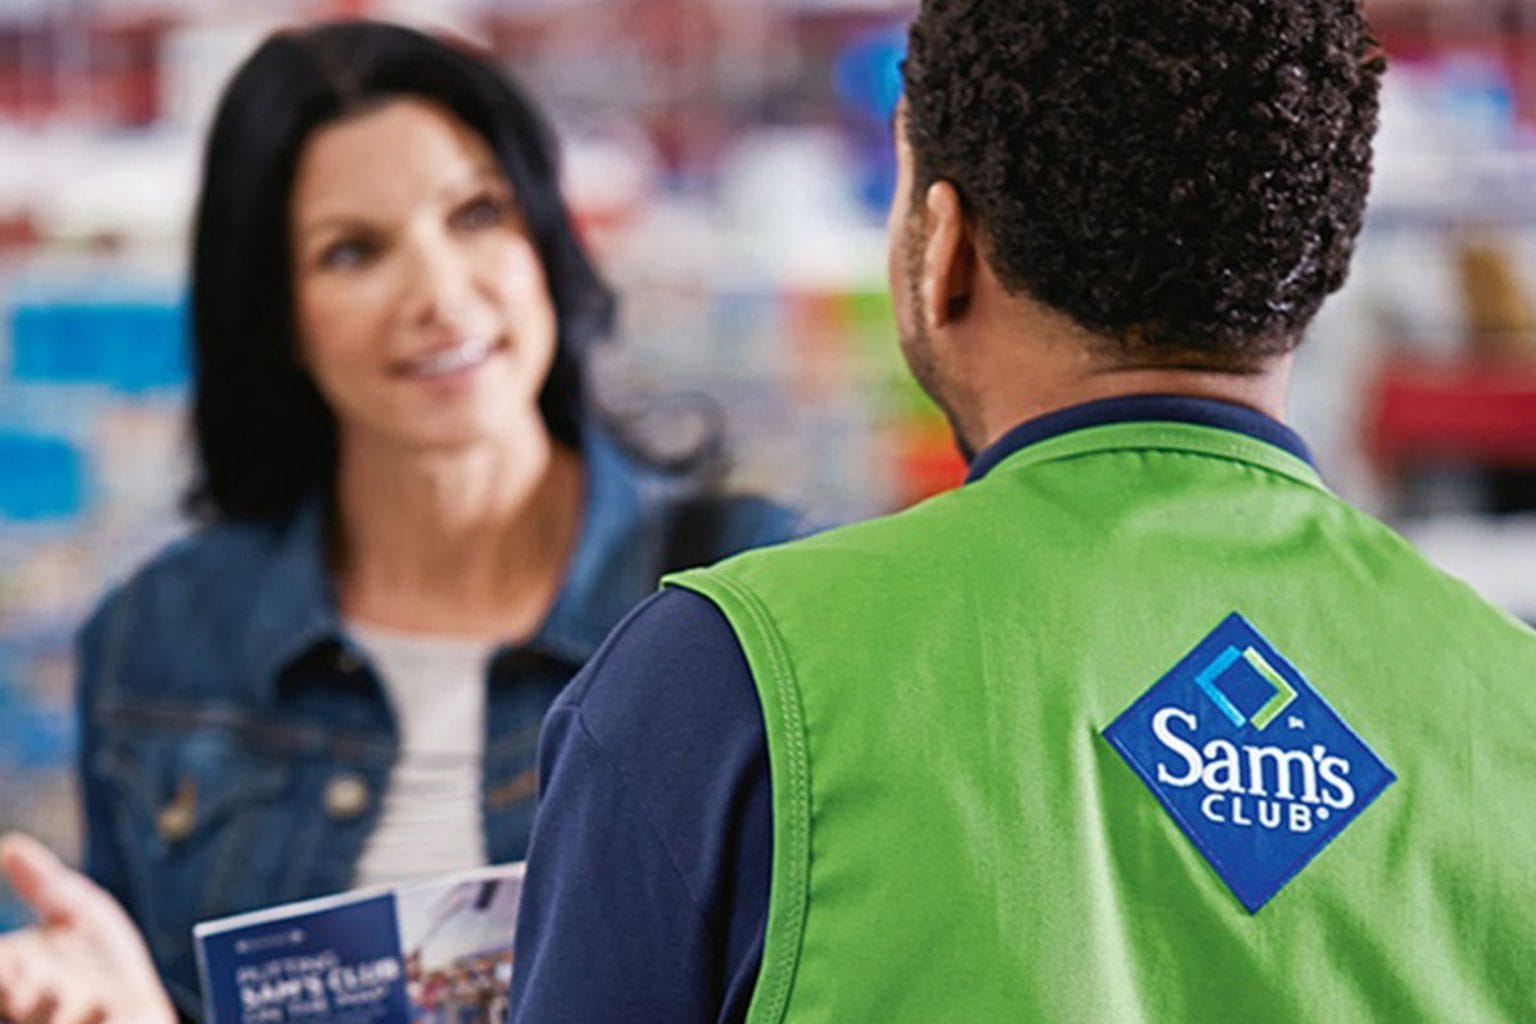 Score a Sam's Club membership and complimentary meal for $19.99